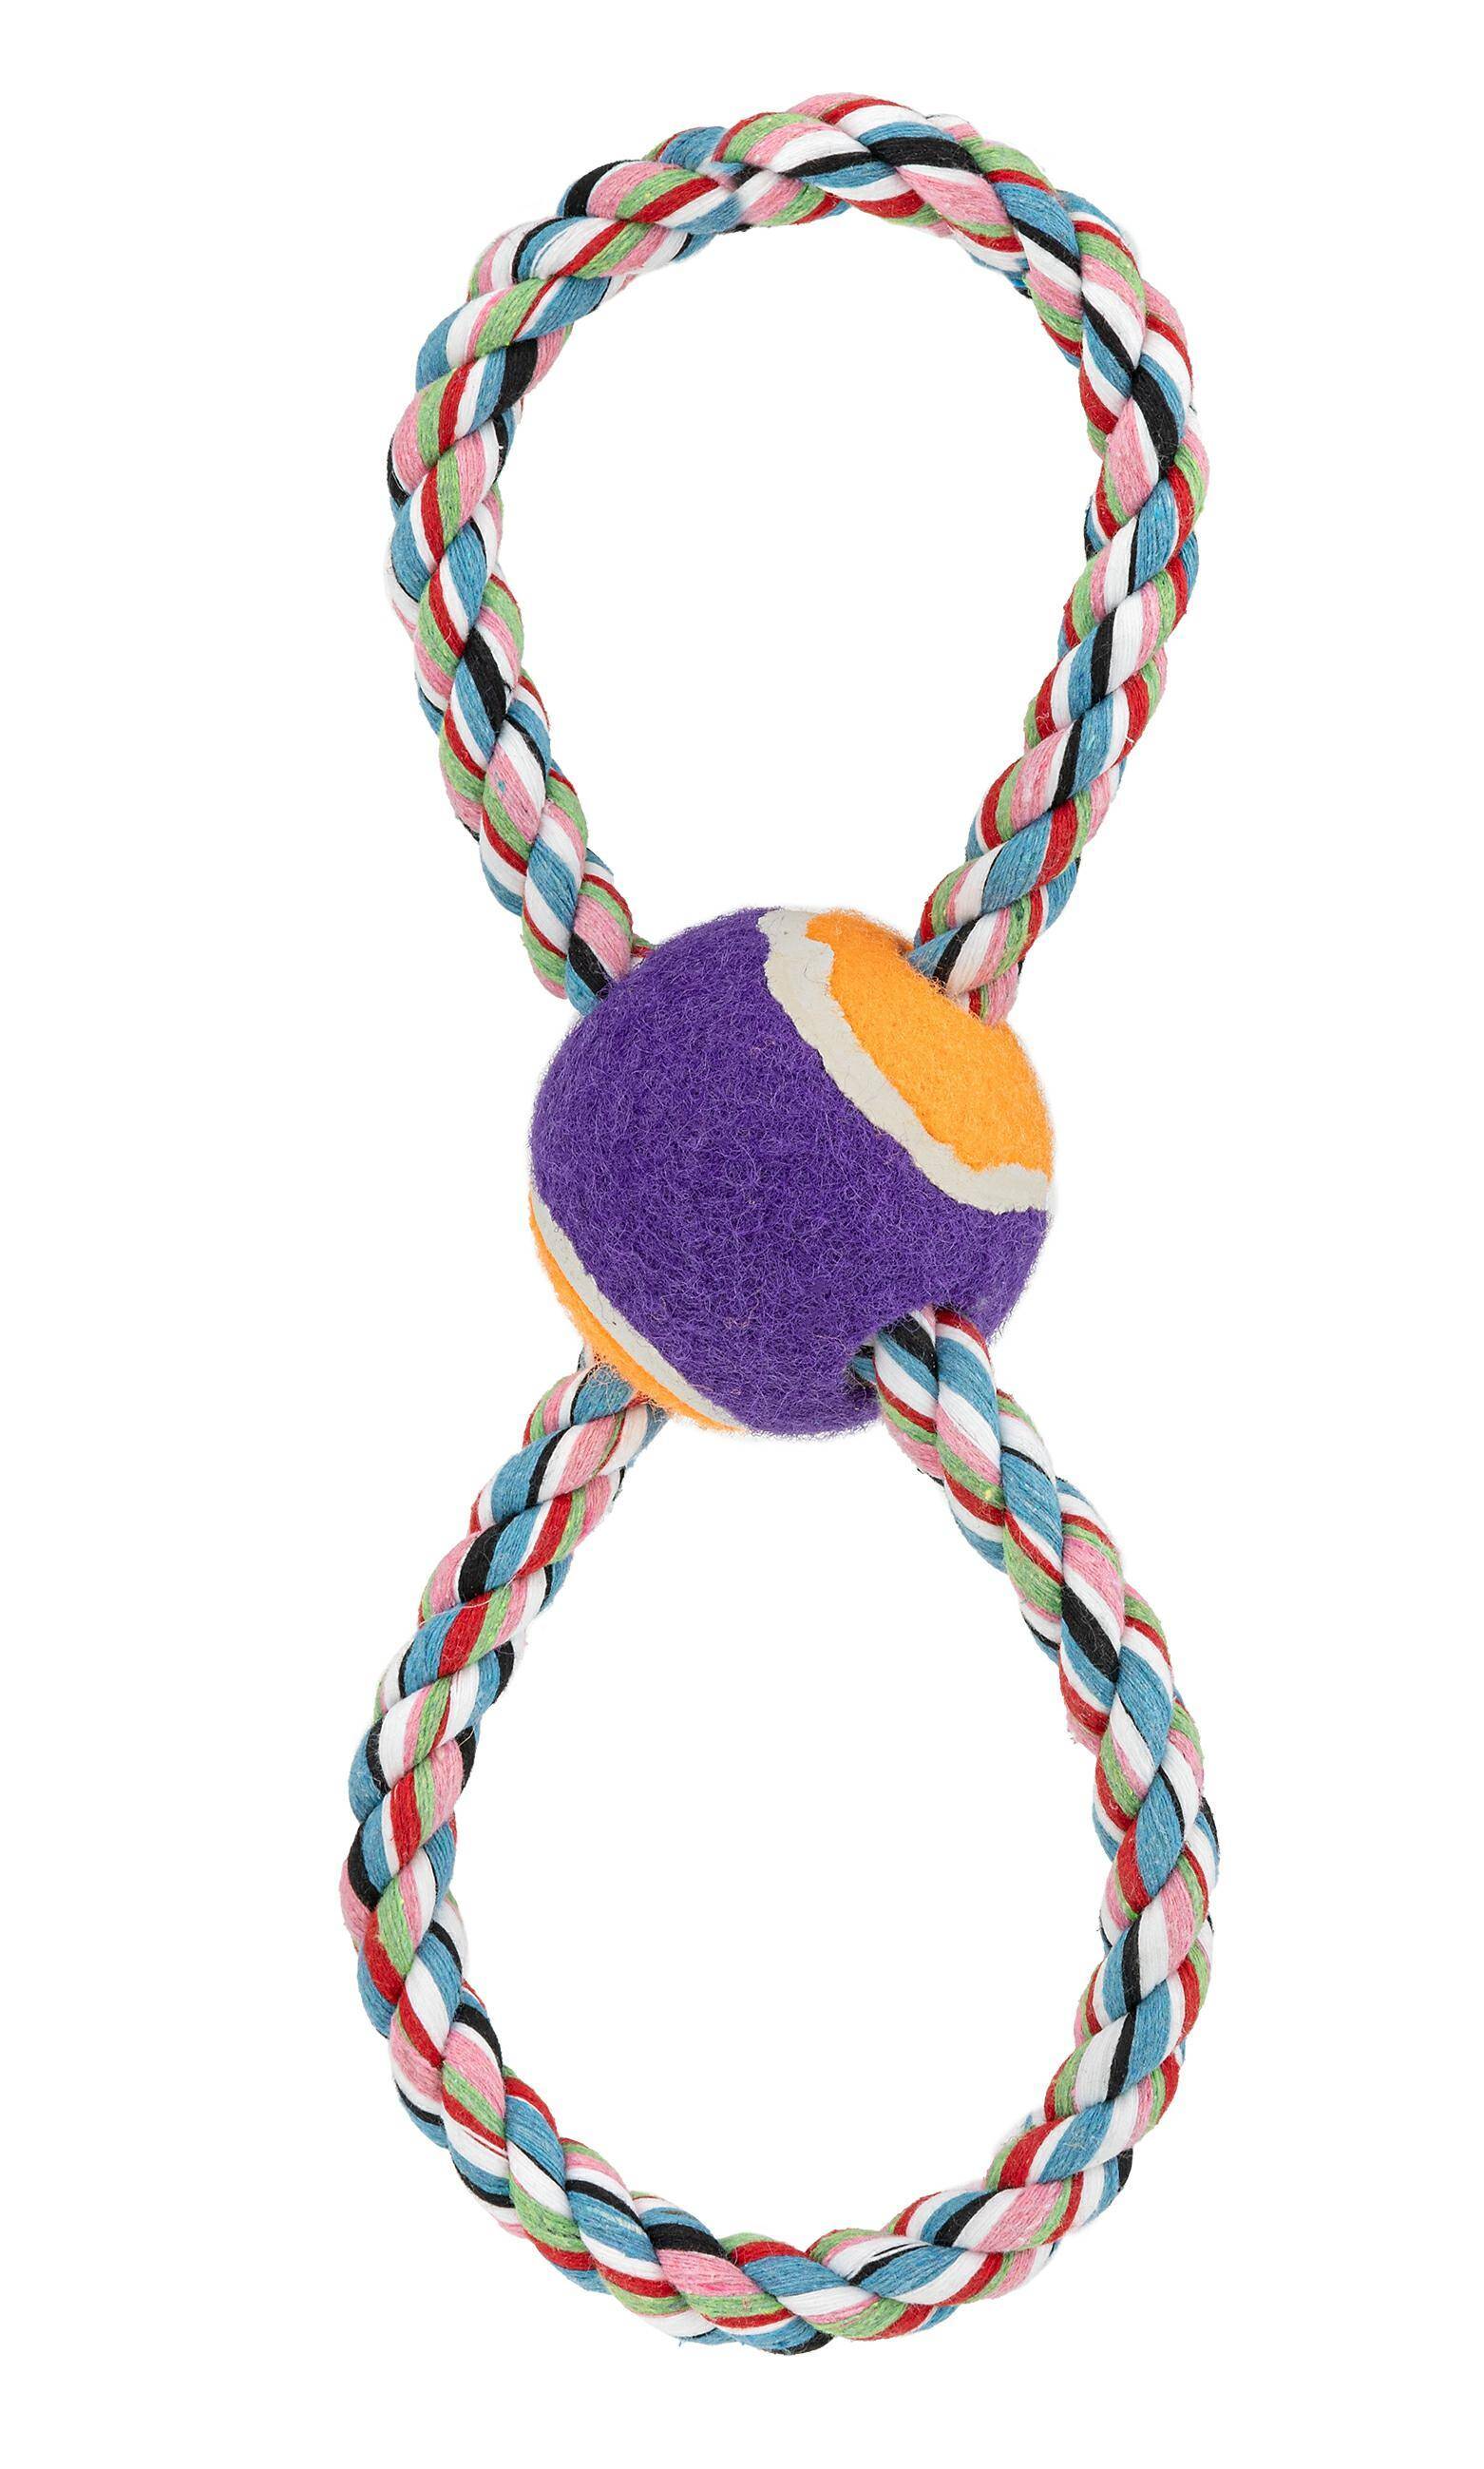 Rope Toy / Eight with Tennis Ball - Happet Z699 - 28cm